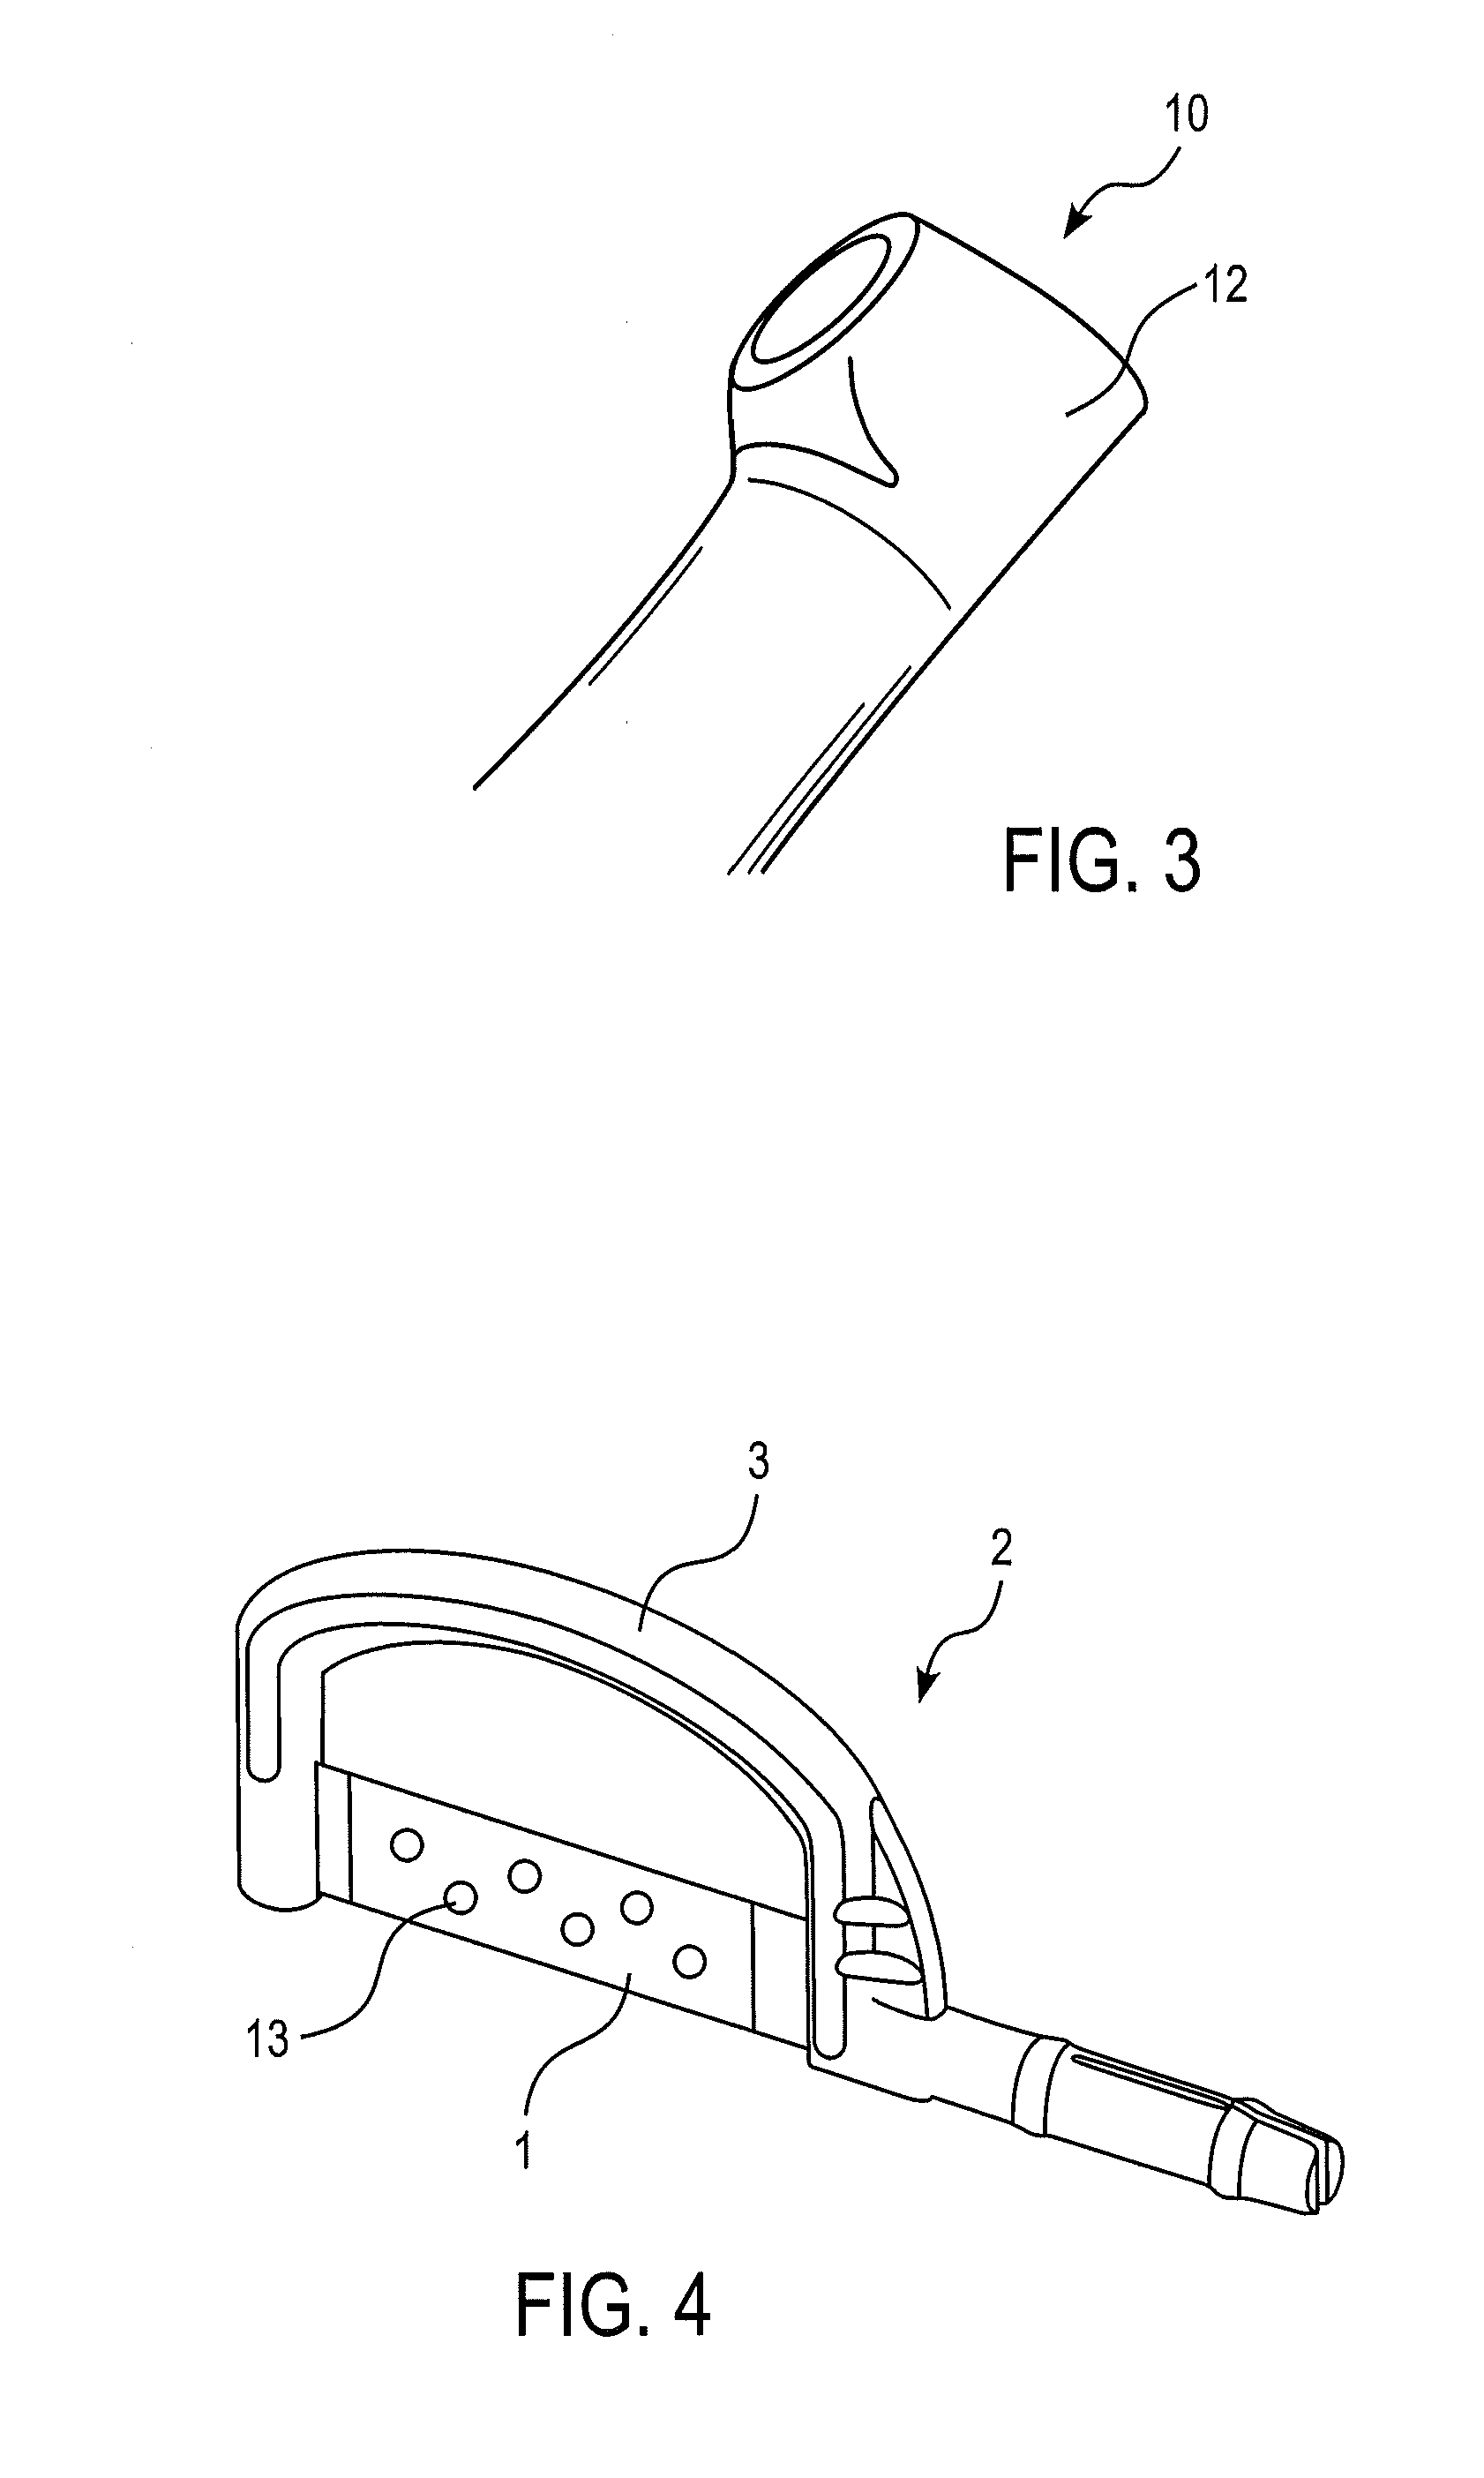 Apparatus for removing enamel or debris from a tooth